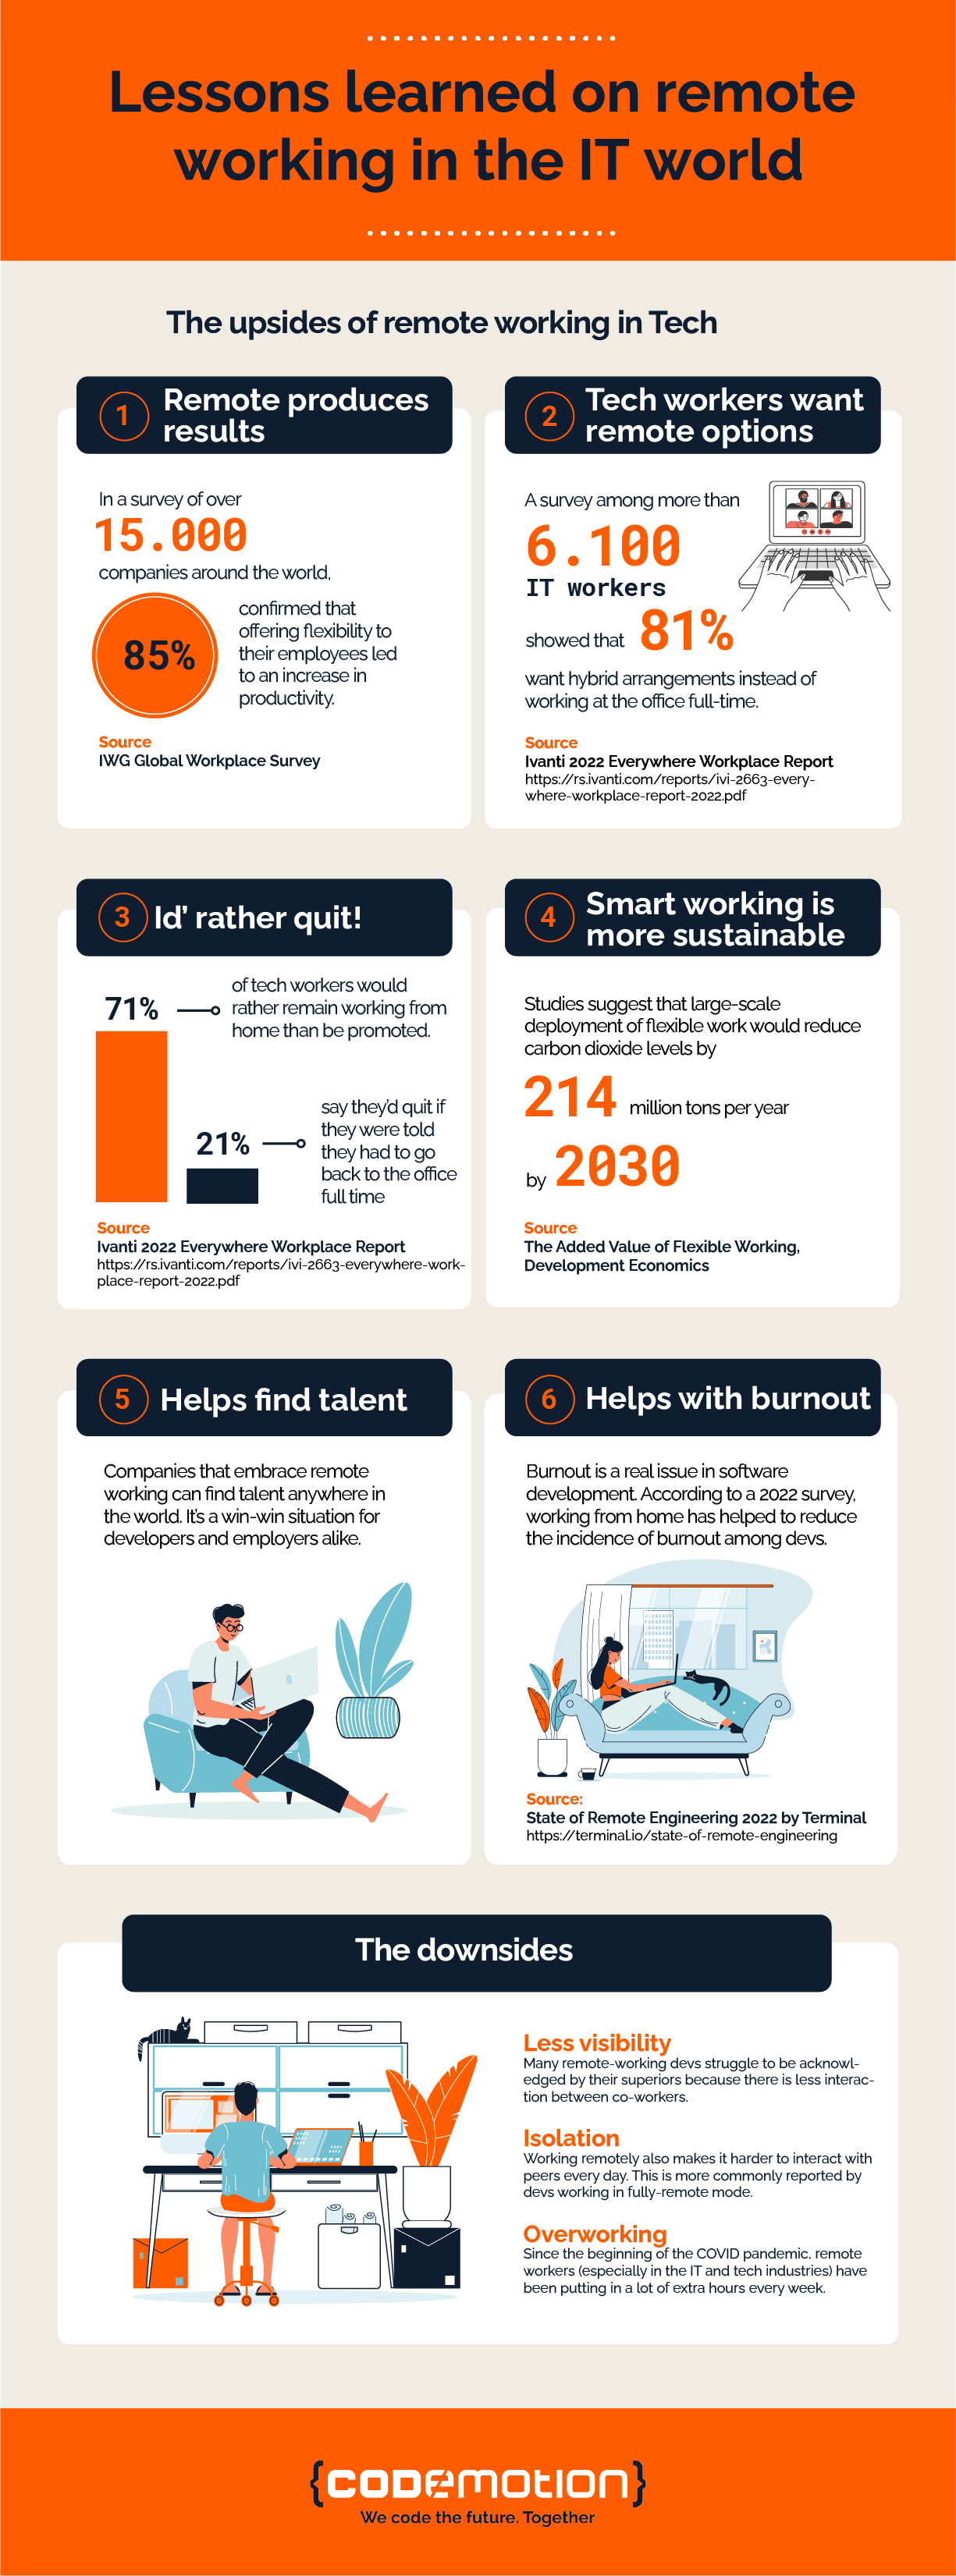 remote working IT, hybrid working IT, infographic